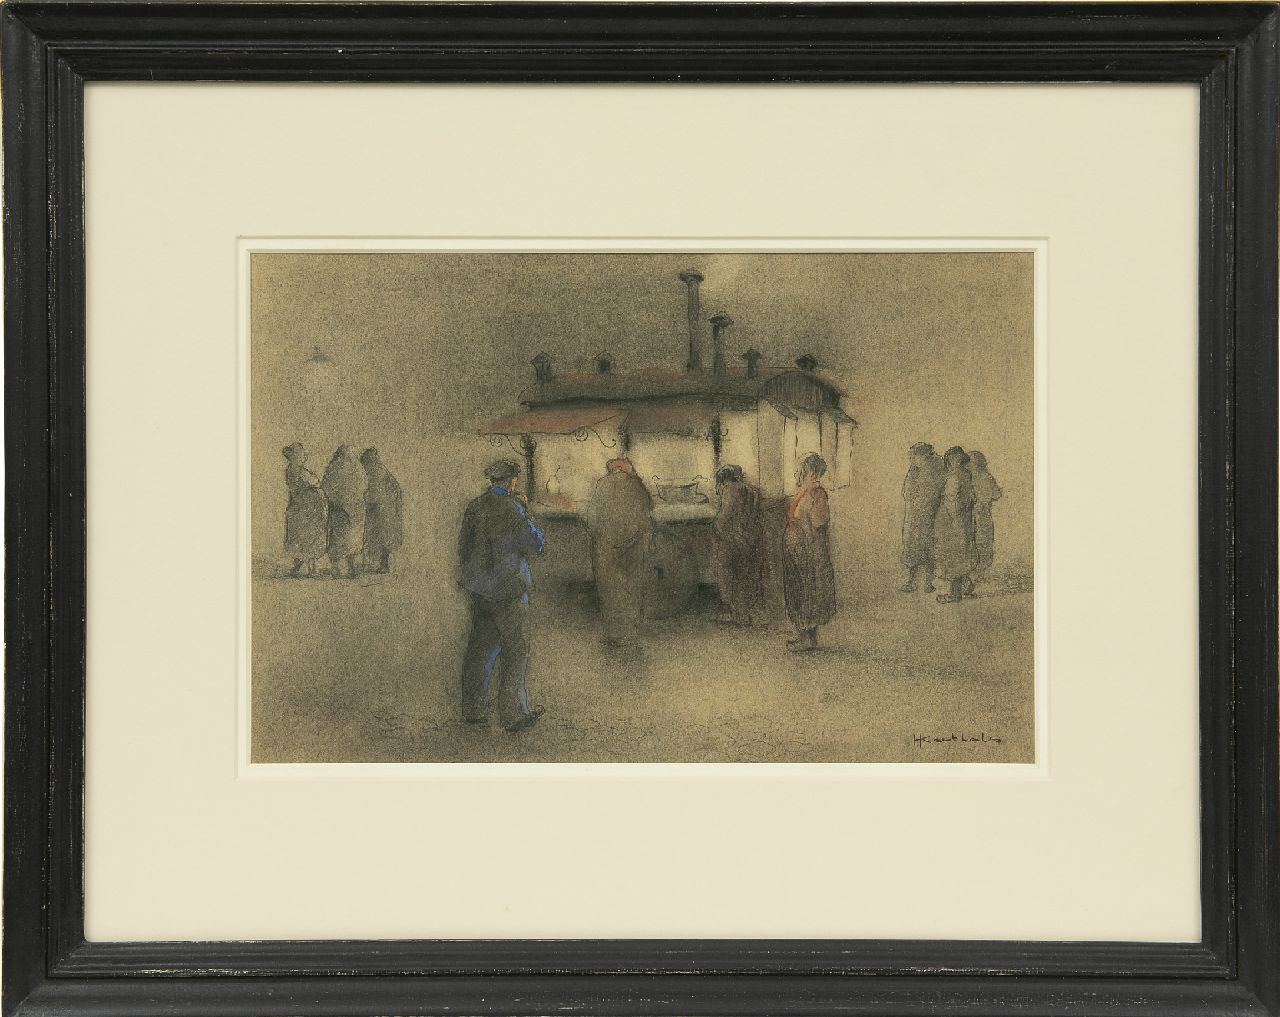 Korthals J.  | Johannes 'Jan' Korthals | Watercolours and drawings offered for sale | Buying french fries, pencil and chalk on paper 29.3 x 39.5 cm, signed l.r.